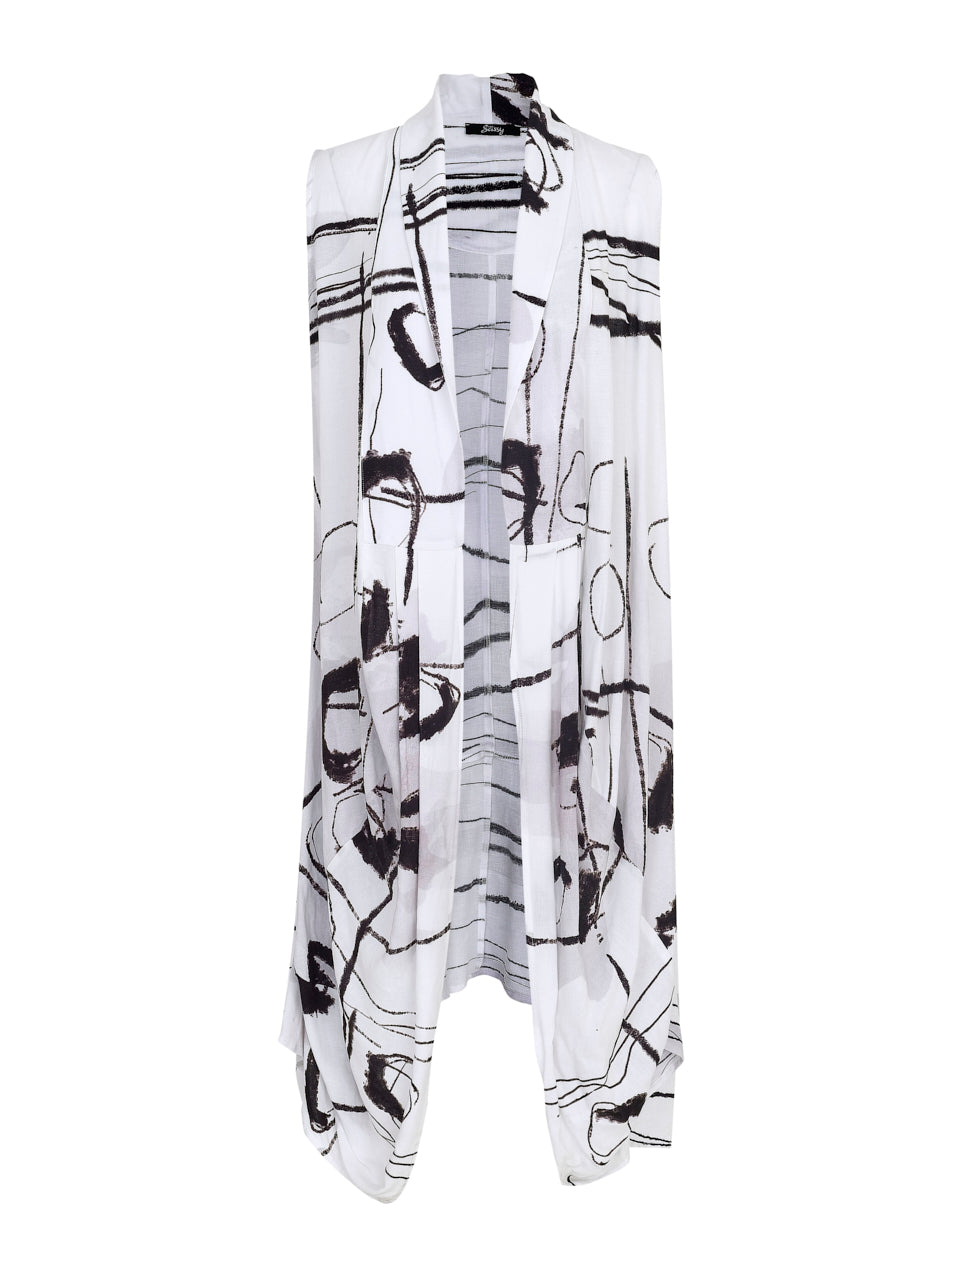 eversassy edge to edge waterfall style dustercoat in white with black scribble print (front)